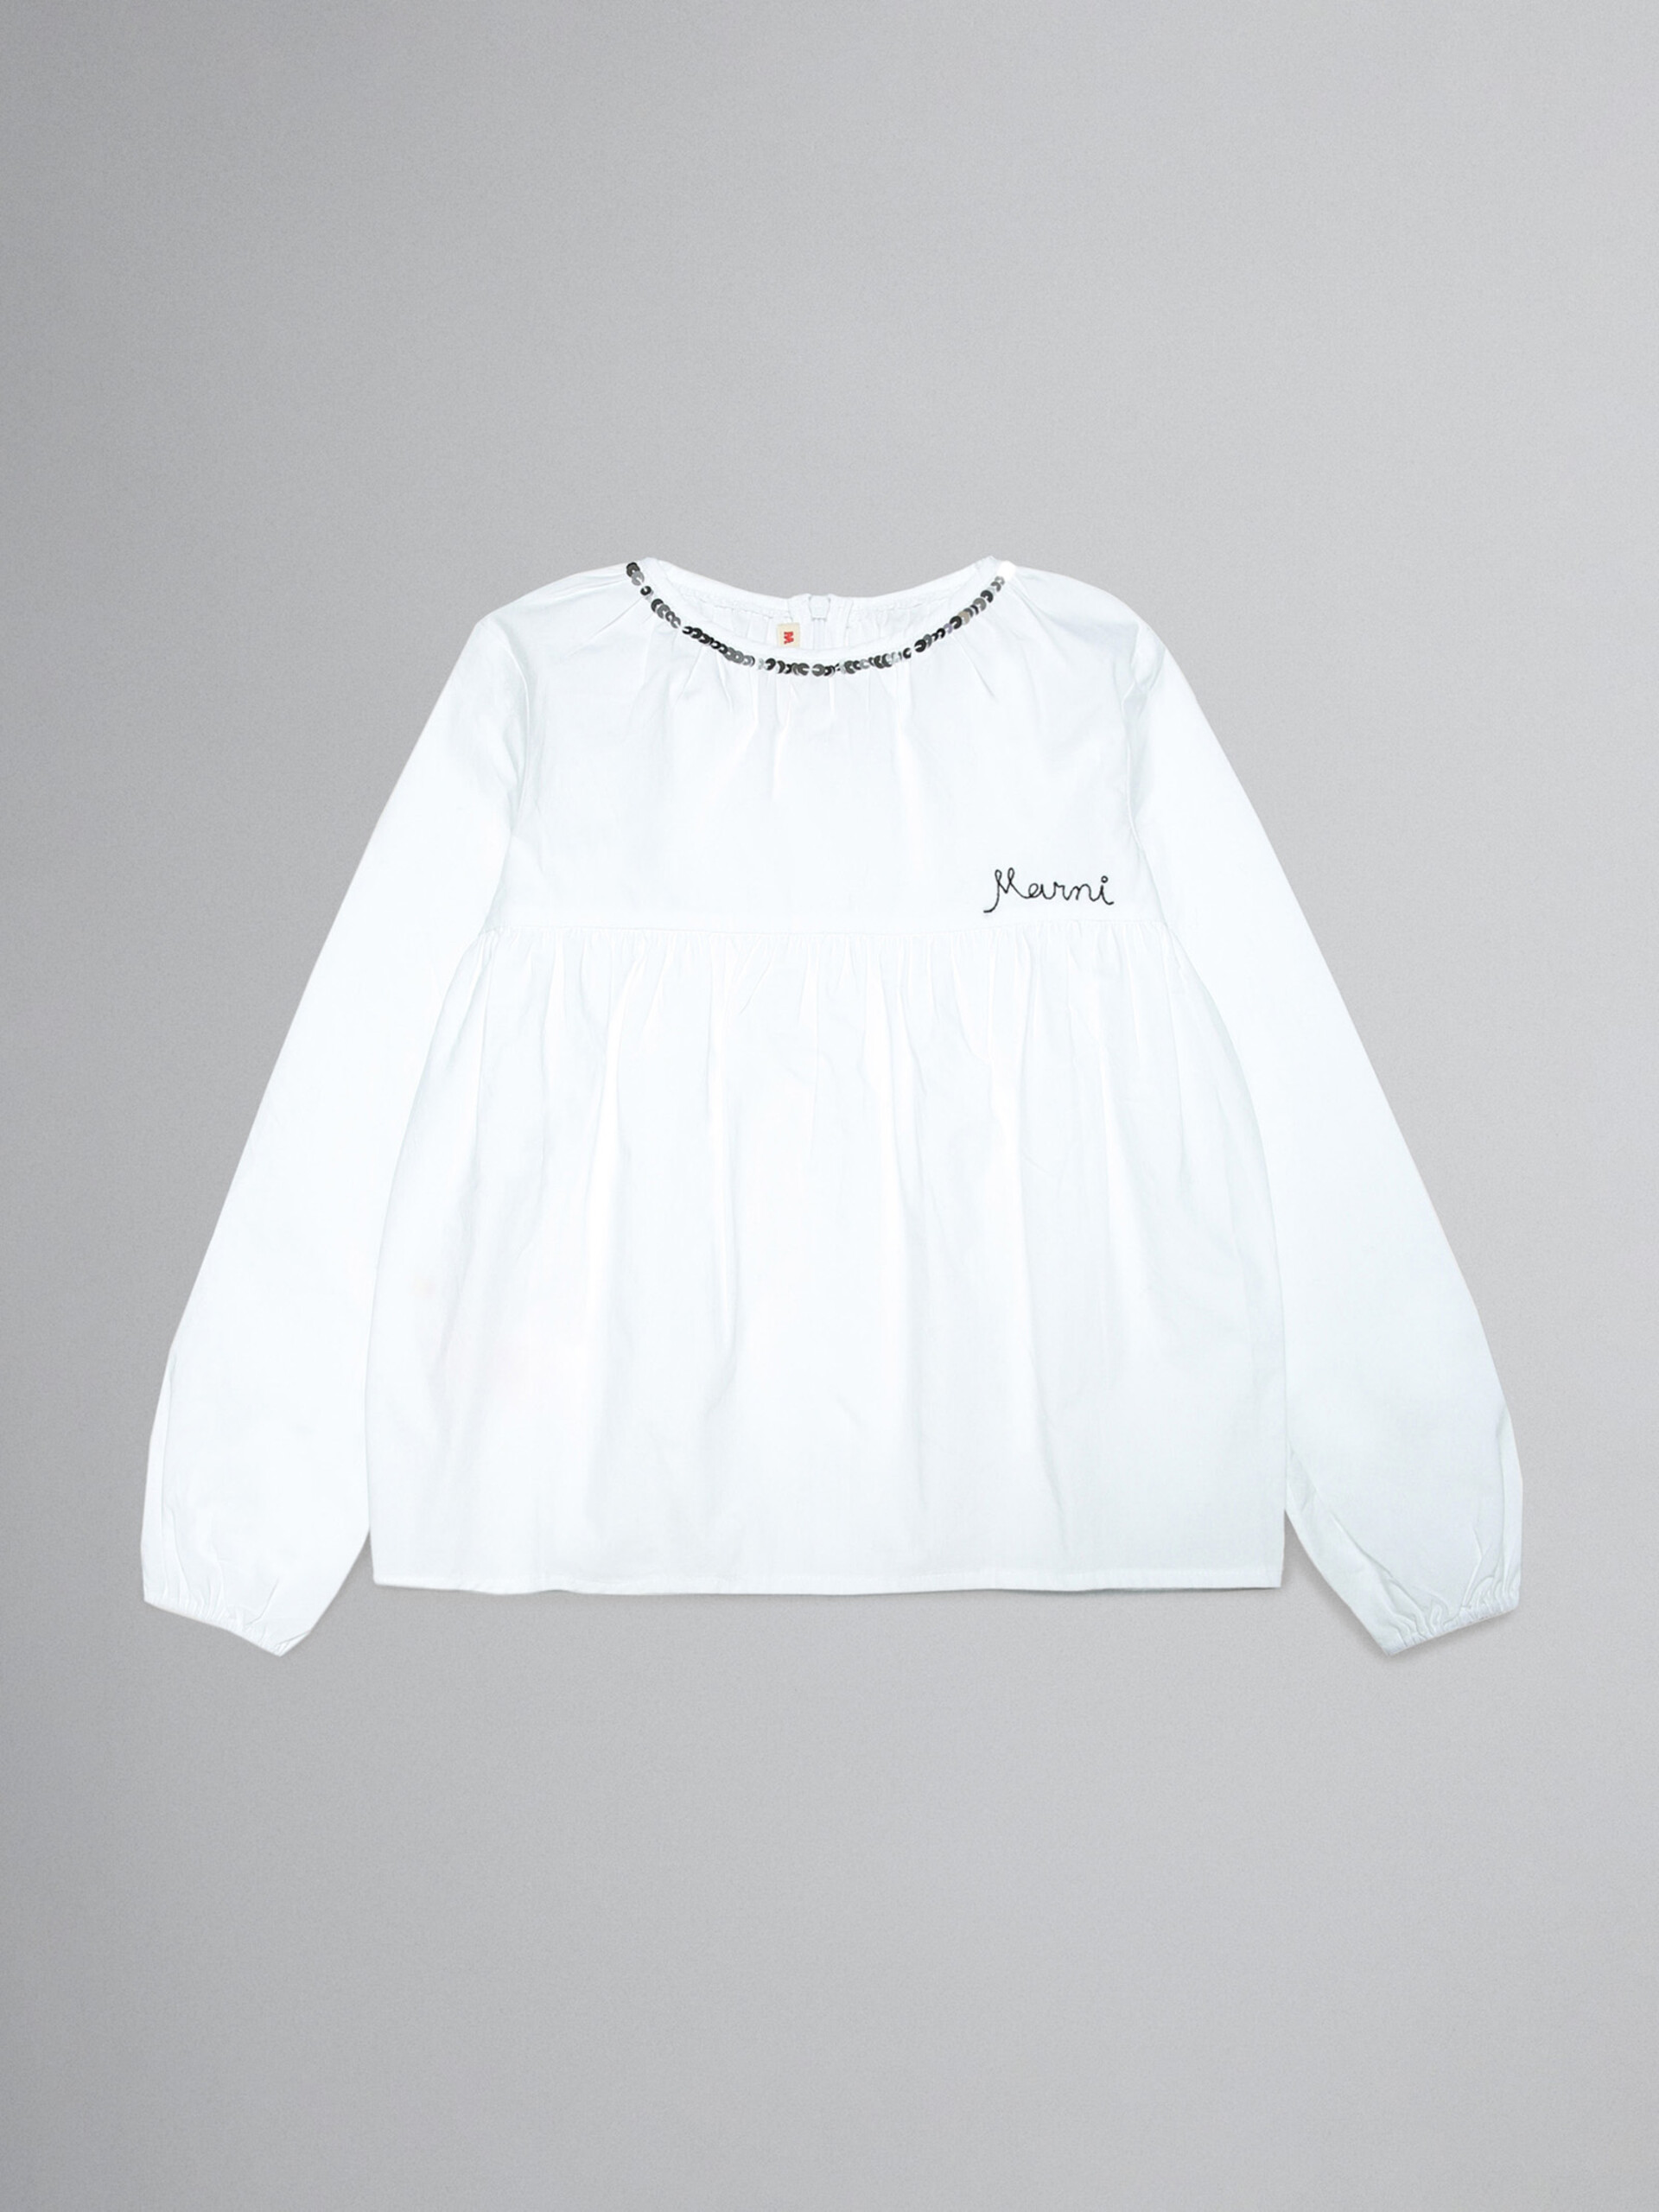 White long-sleeved top with embroidered lettering - Shirts - Image 1